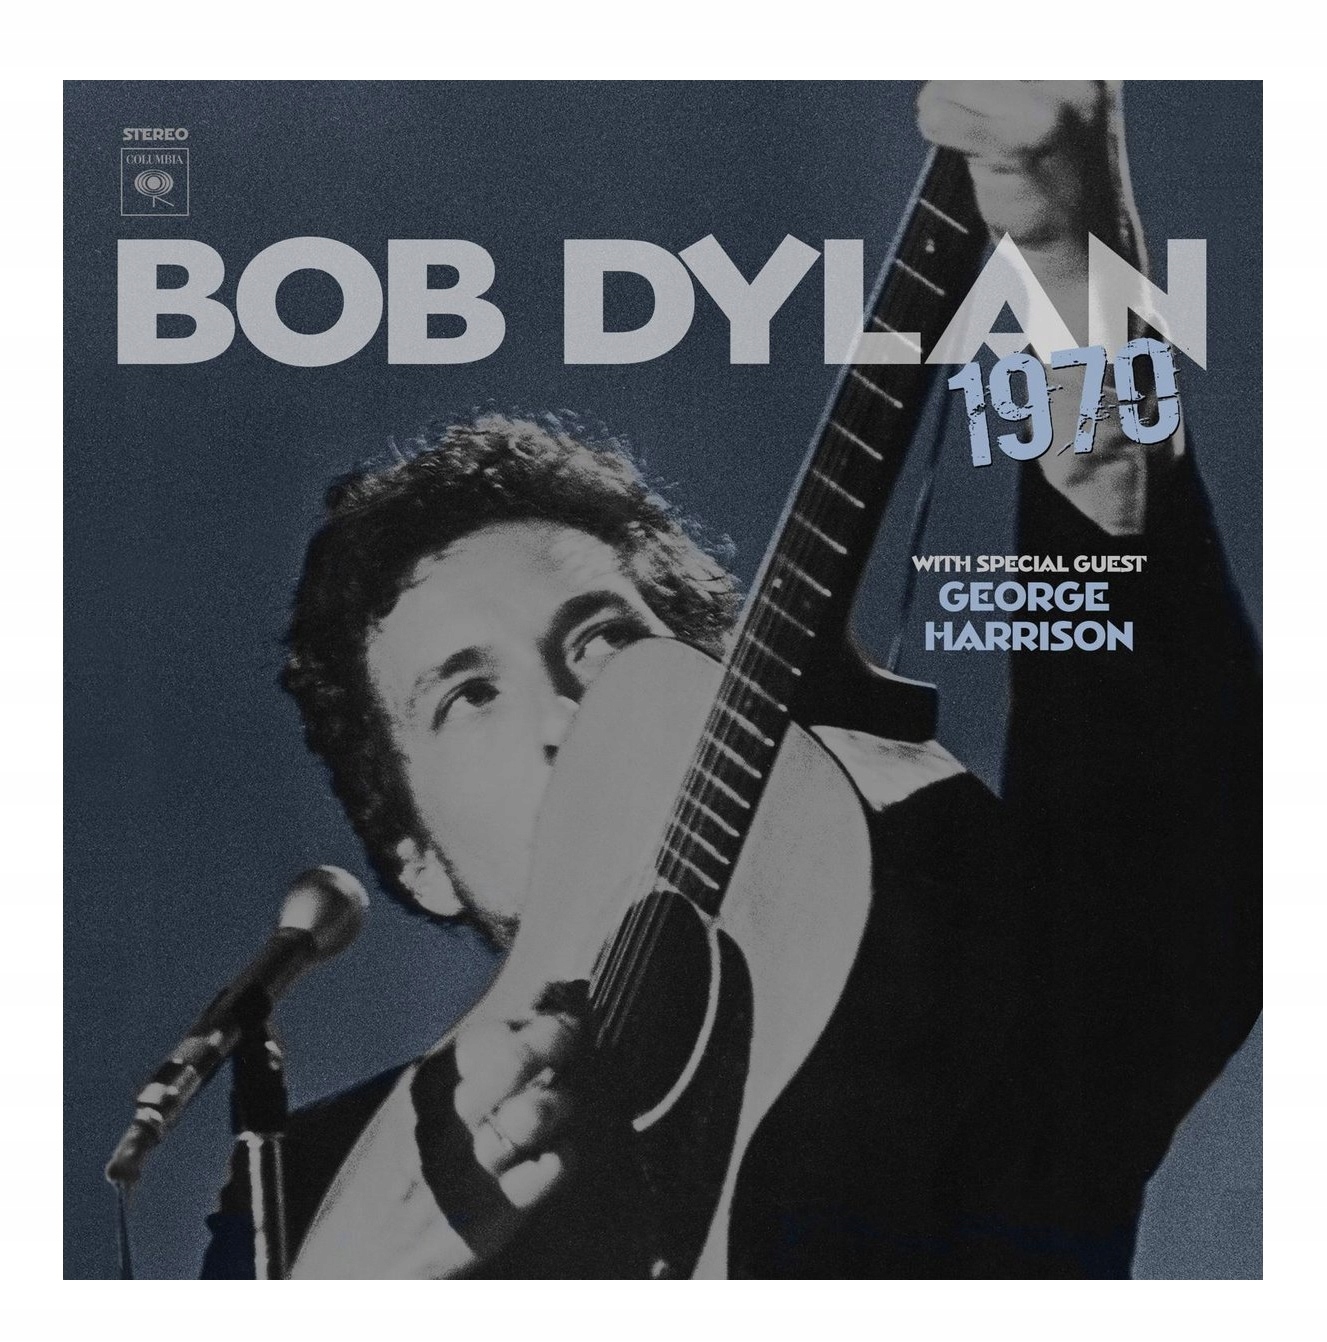 BOB DYLAN 1970 The 50th Anniversary Collection 3CD